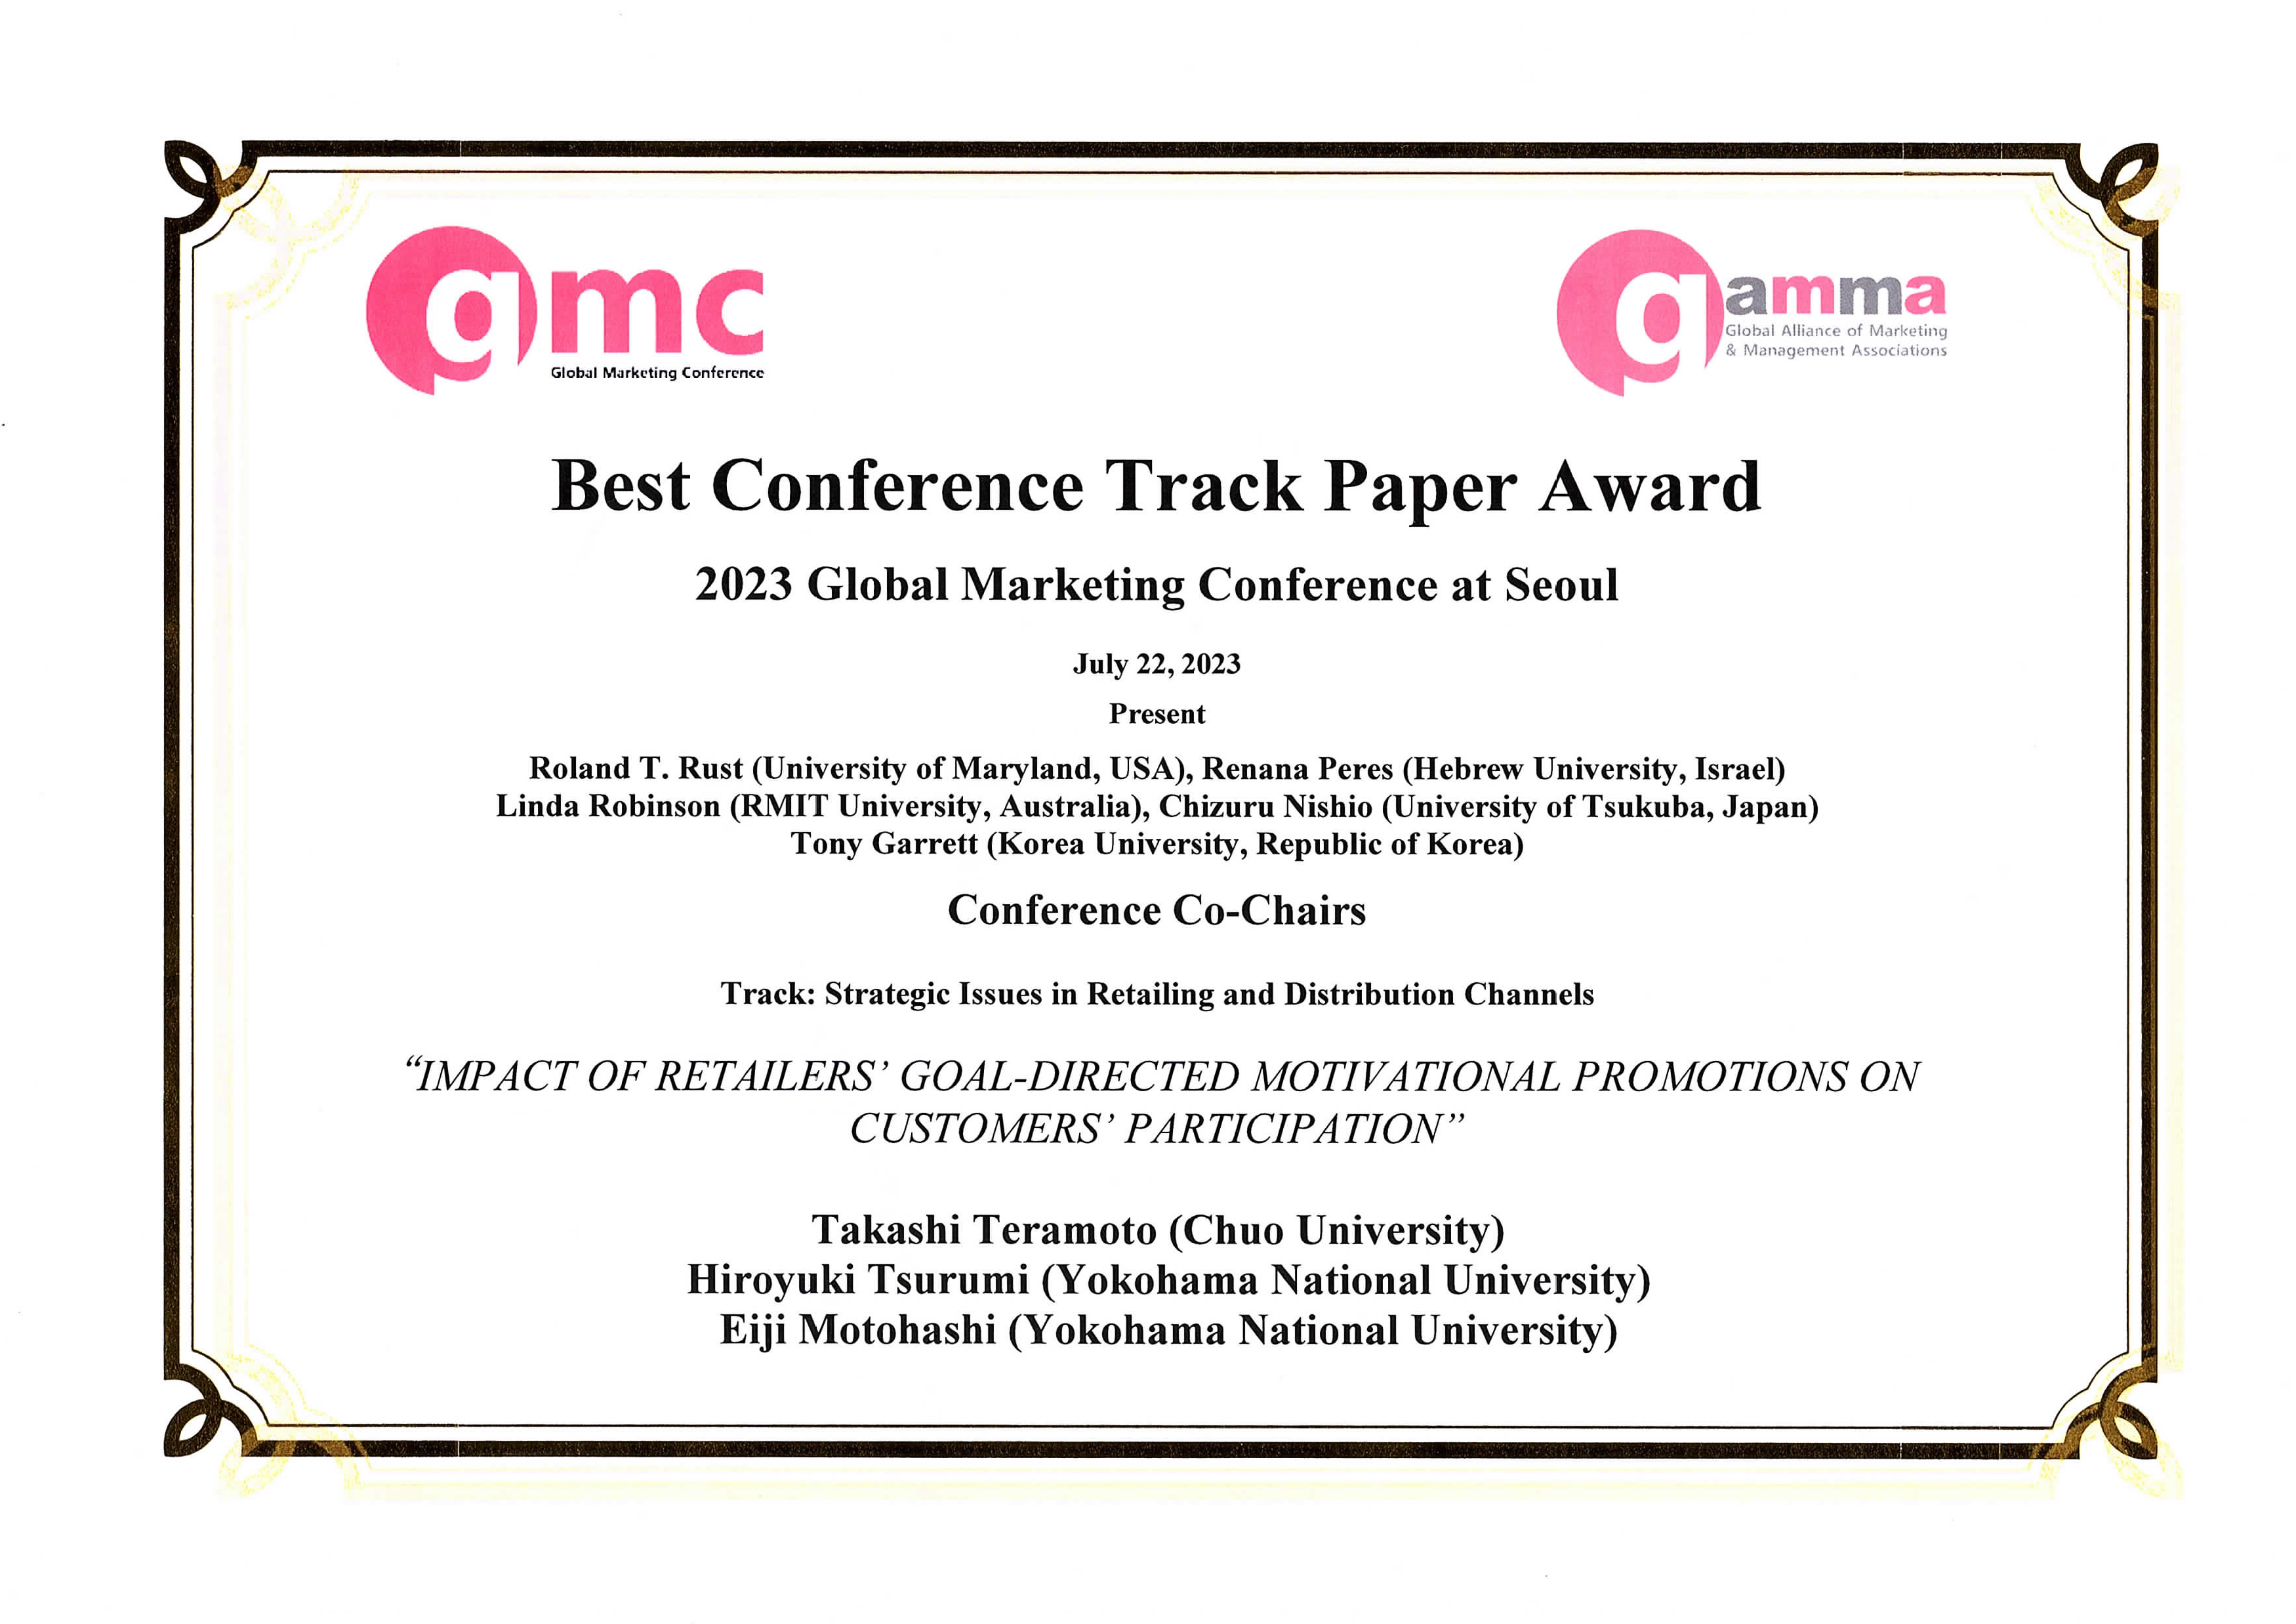 2023GMC_BestConferenceTrackPaperAward.png